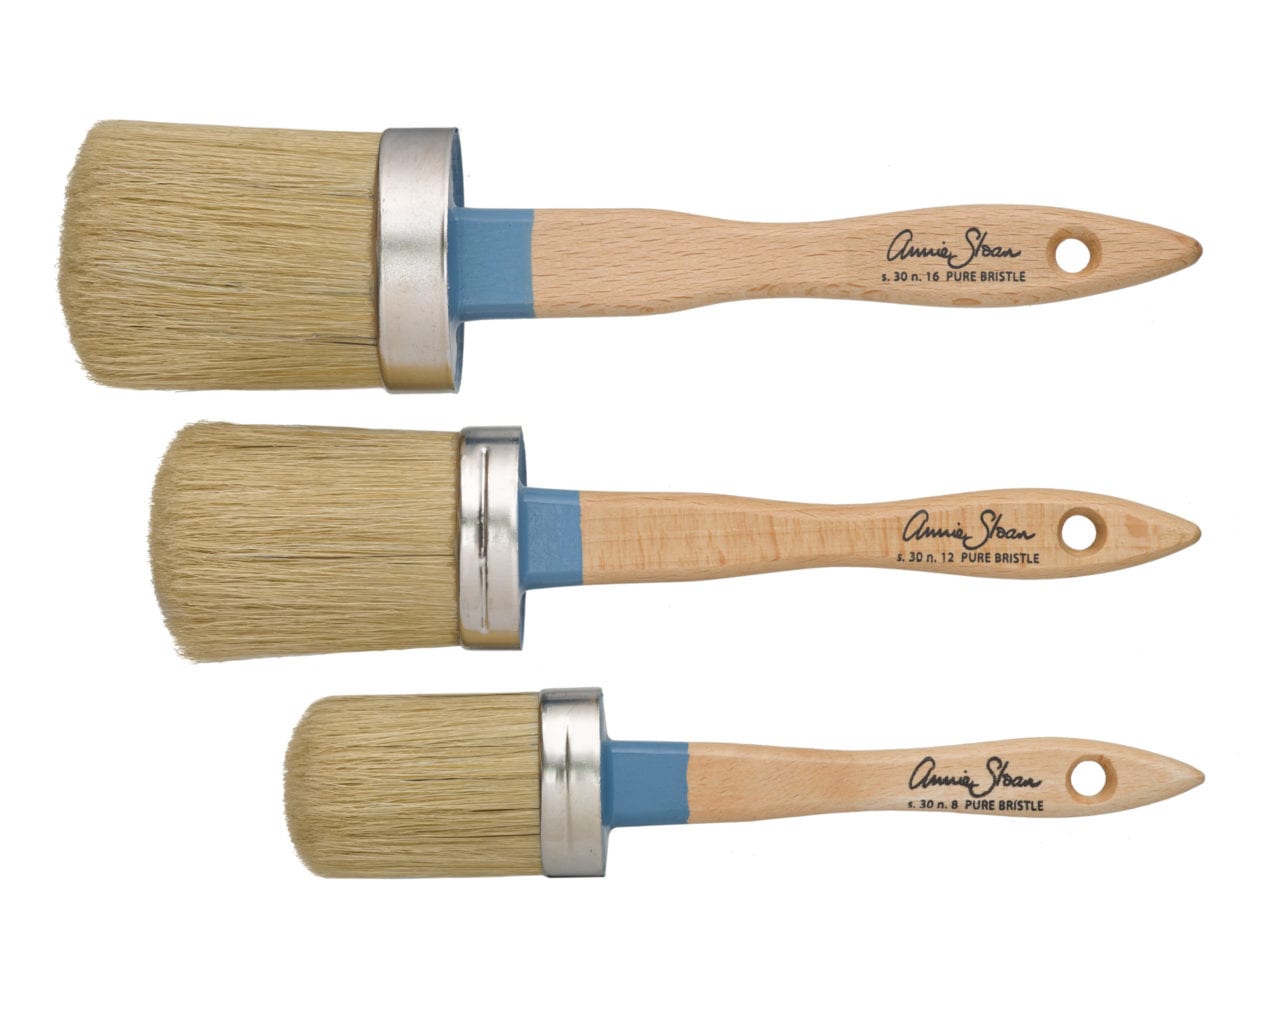 Annie Sloan Chalk Paint® Brushes in small, medium and large